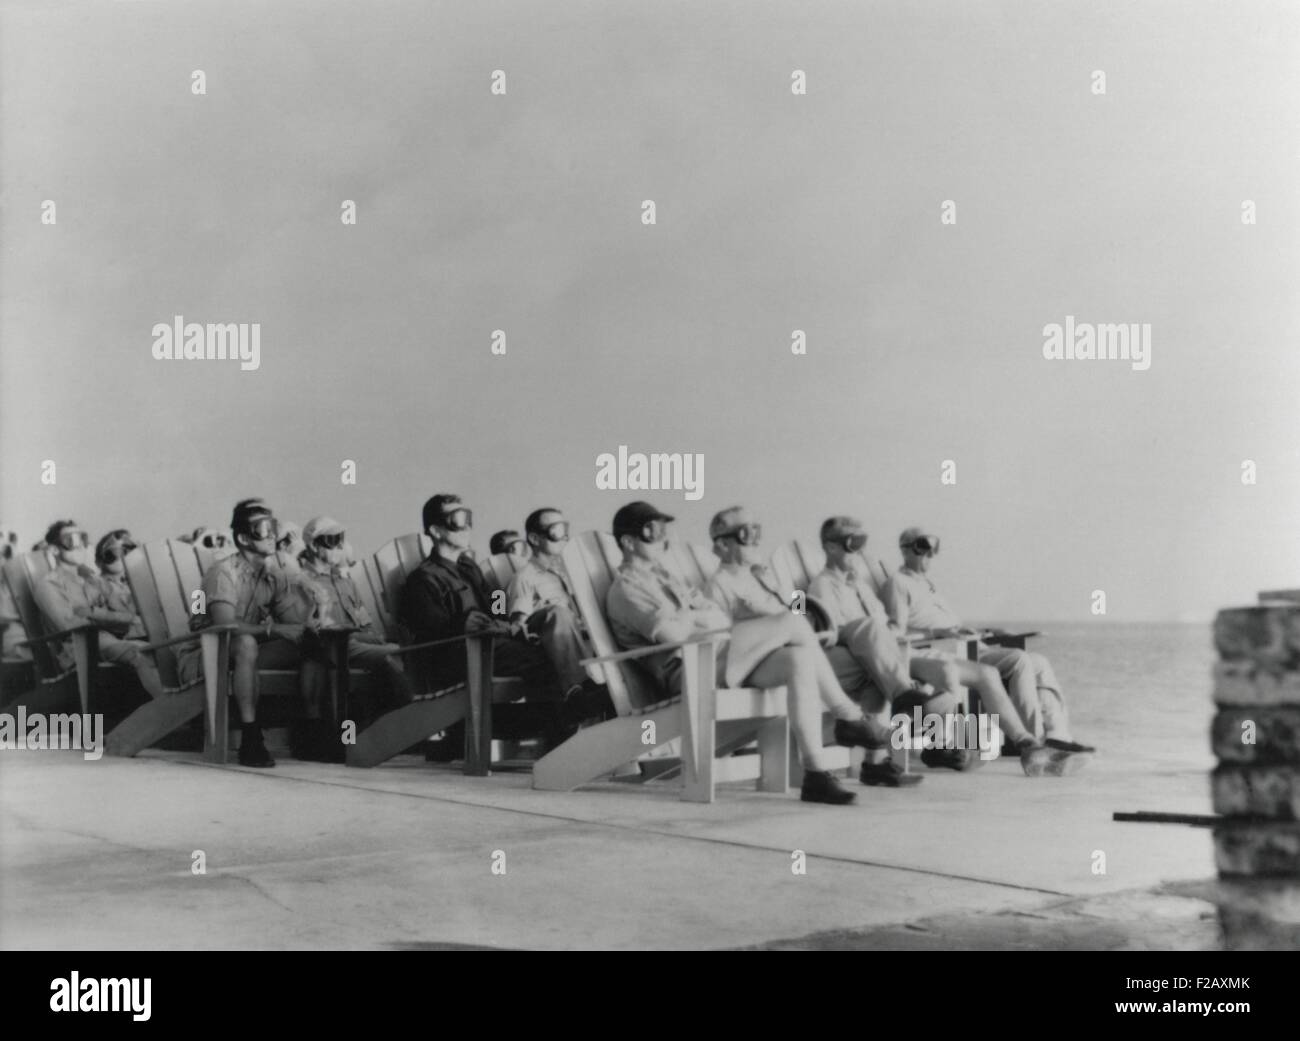 VIPs view the DOG shot, an 81 kiloton atomic detonation wearing safety goggles. They are sitting on Adirondack chair of the Officers Beach Club patio on Enewetak Island. The blast wave arrived at the location of the VIPs some 45 seconds after the initially silent flash. April 7, 1951. It was first test in a series, Operation Greenhouse, that tested principles leading to developing thermonuclear weapons (hydrogen bombs). (BSLOC 2015 2 16) Stock Photo